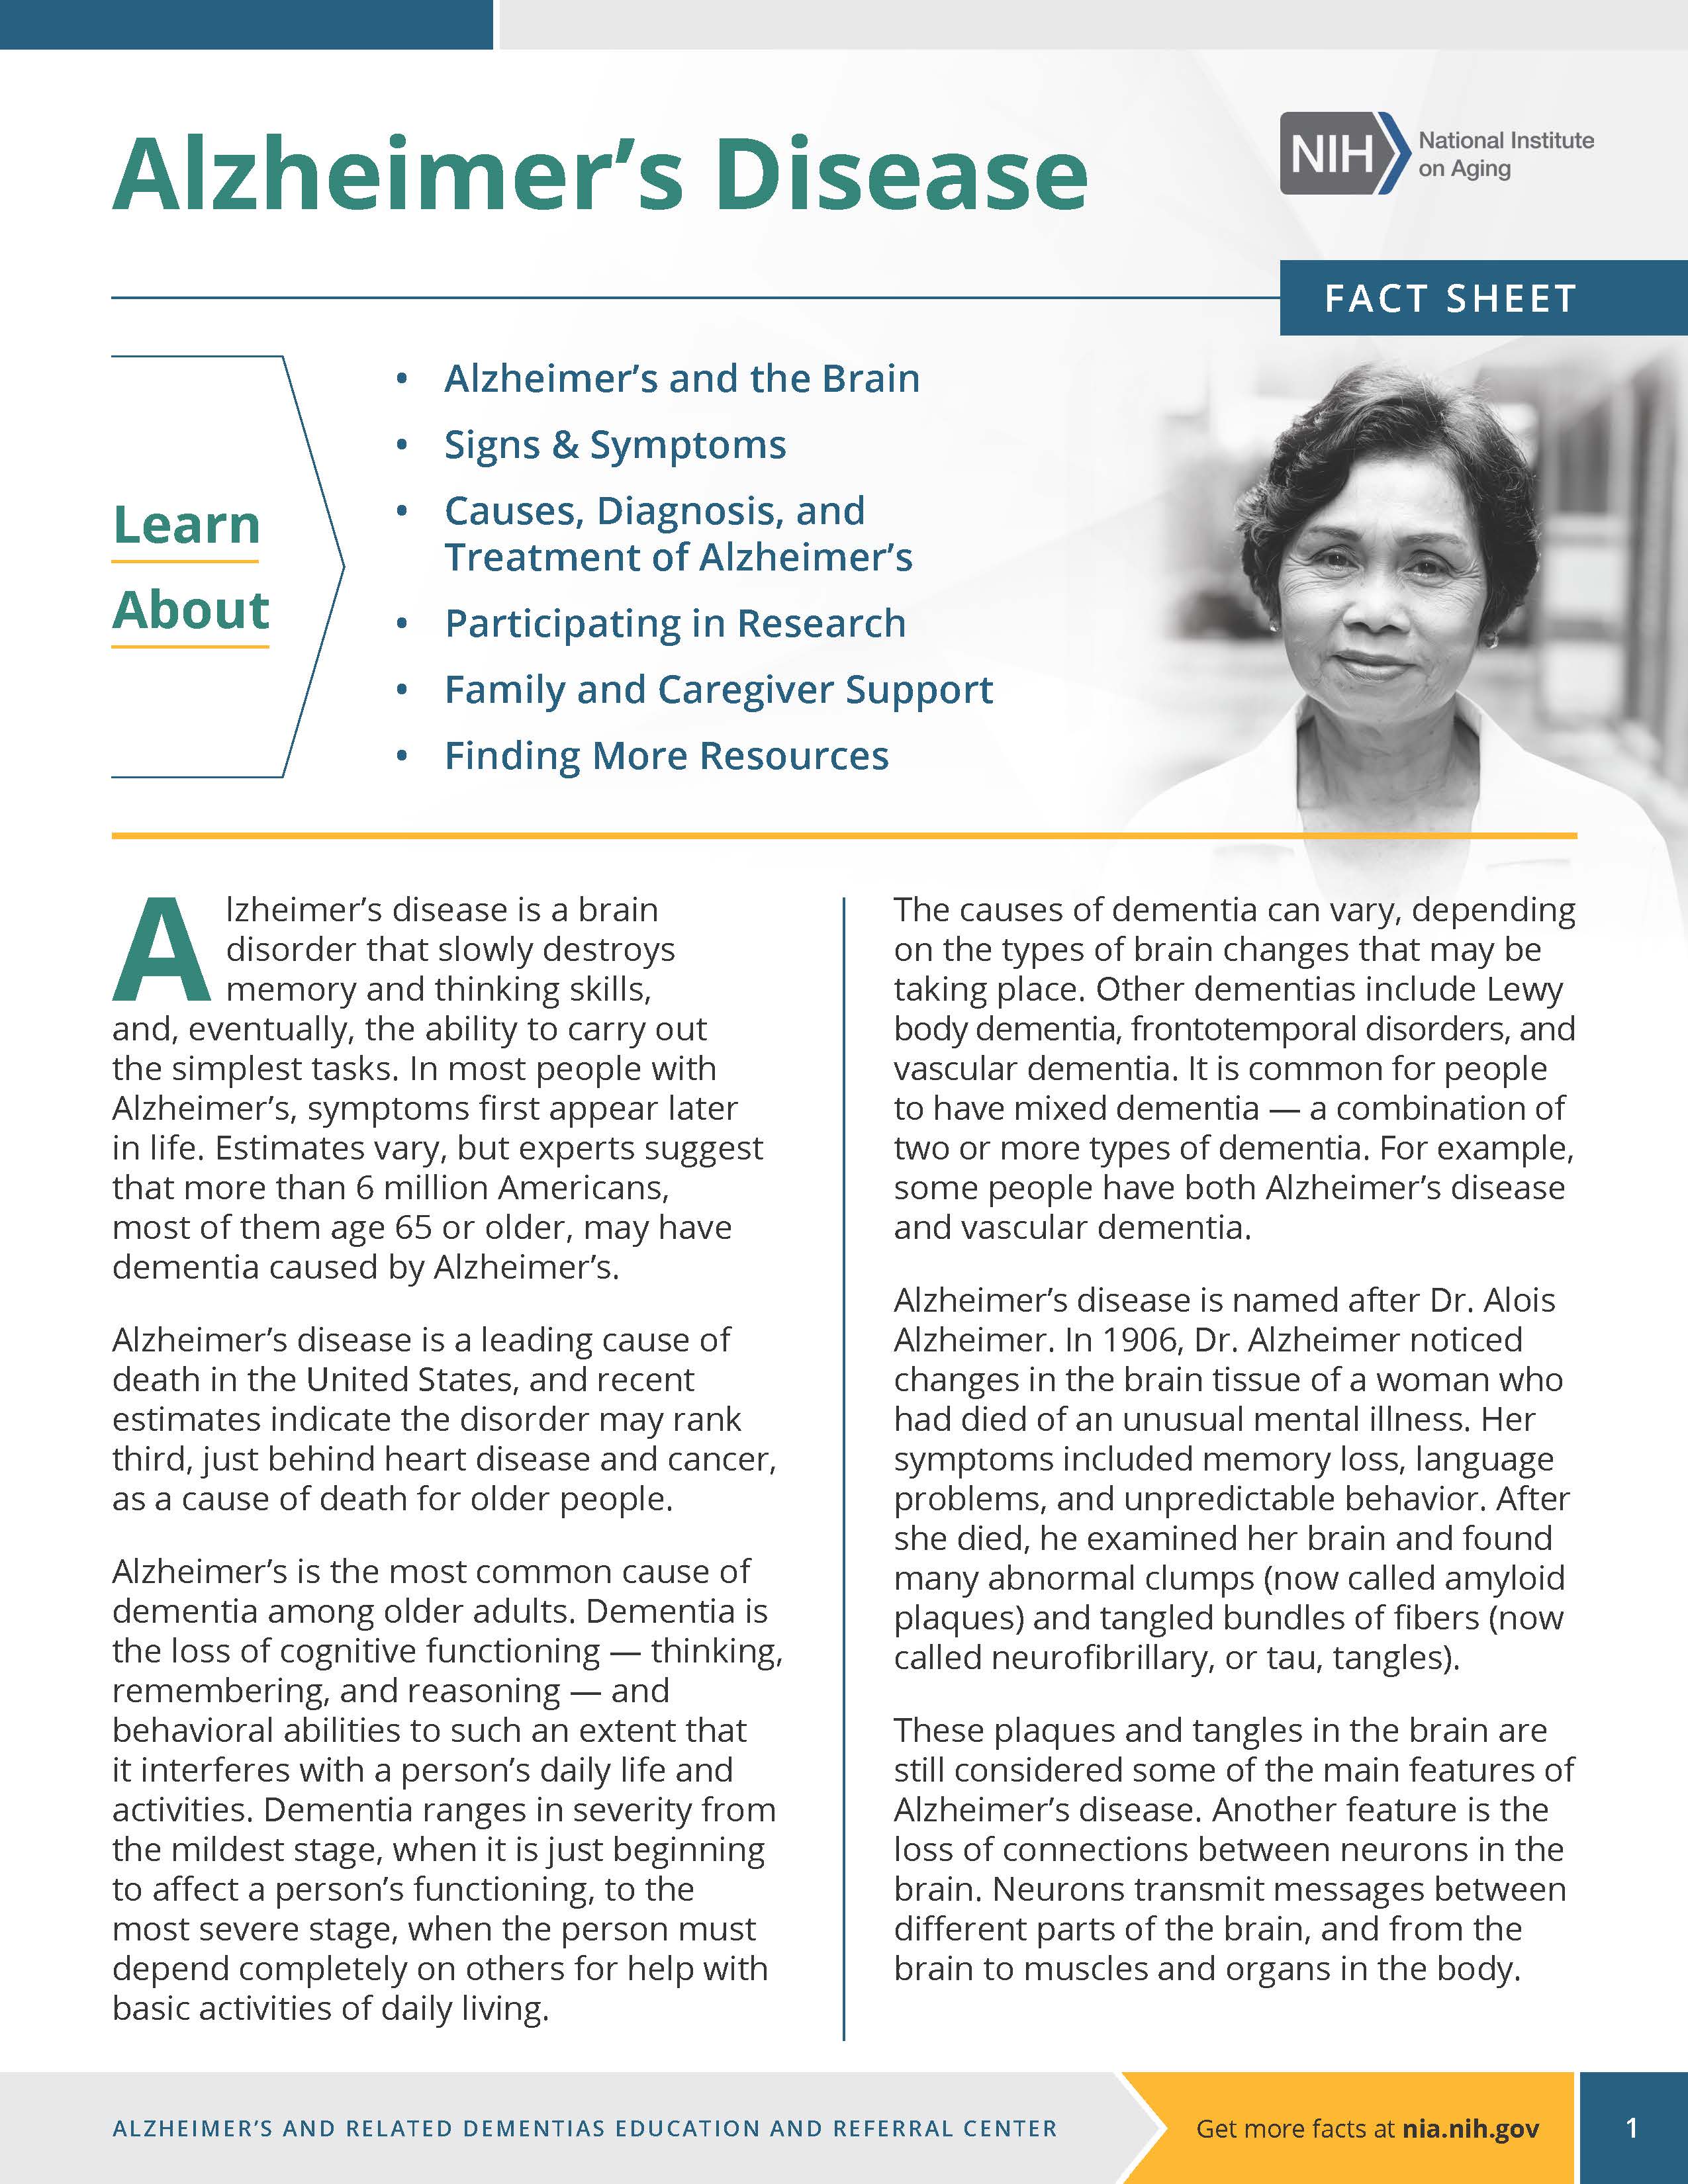 alzheimers-enfermedad_Page_1-image fact sheet eng image click on image to pdf version